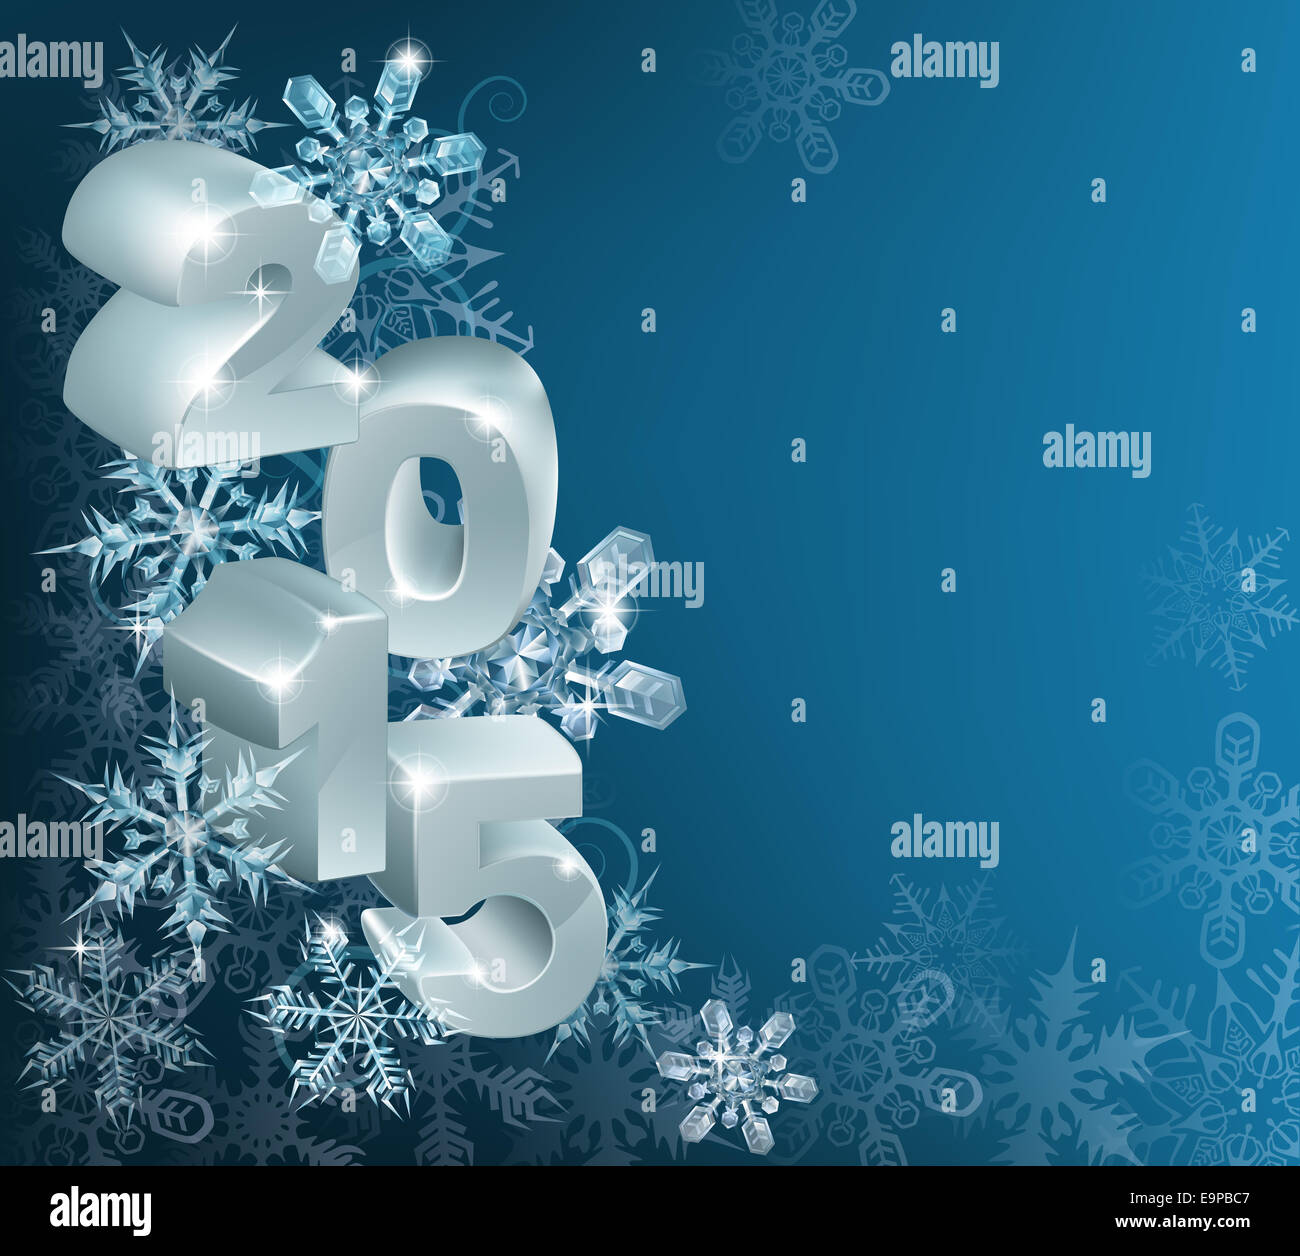 Christmas or new year 2015 decorations background with snowflakes and baubles reading 2015 Stock Photo